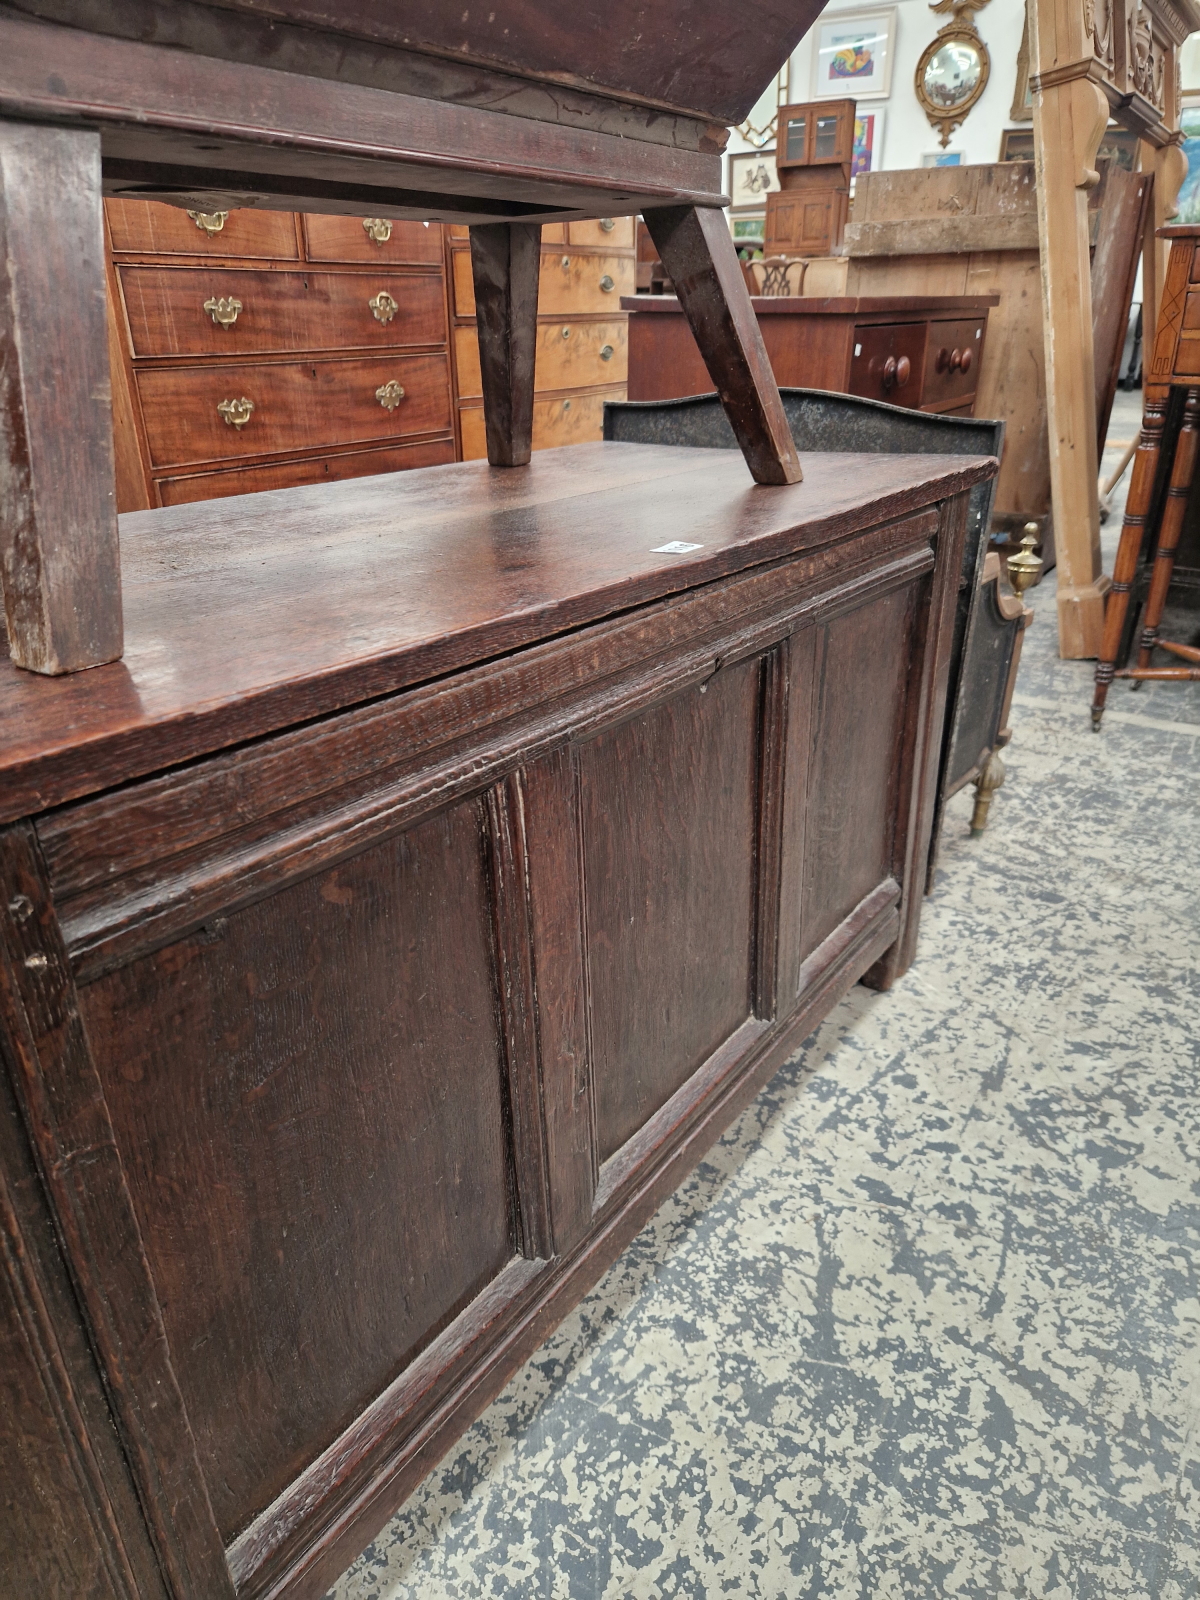 AN 18th C. OAK COFFER WITH A THREE PANELLED FRONT. W 109 x D 47 x H 56cms. - Image 3 of 3